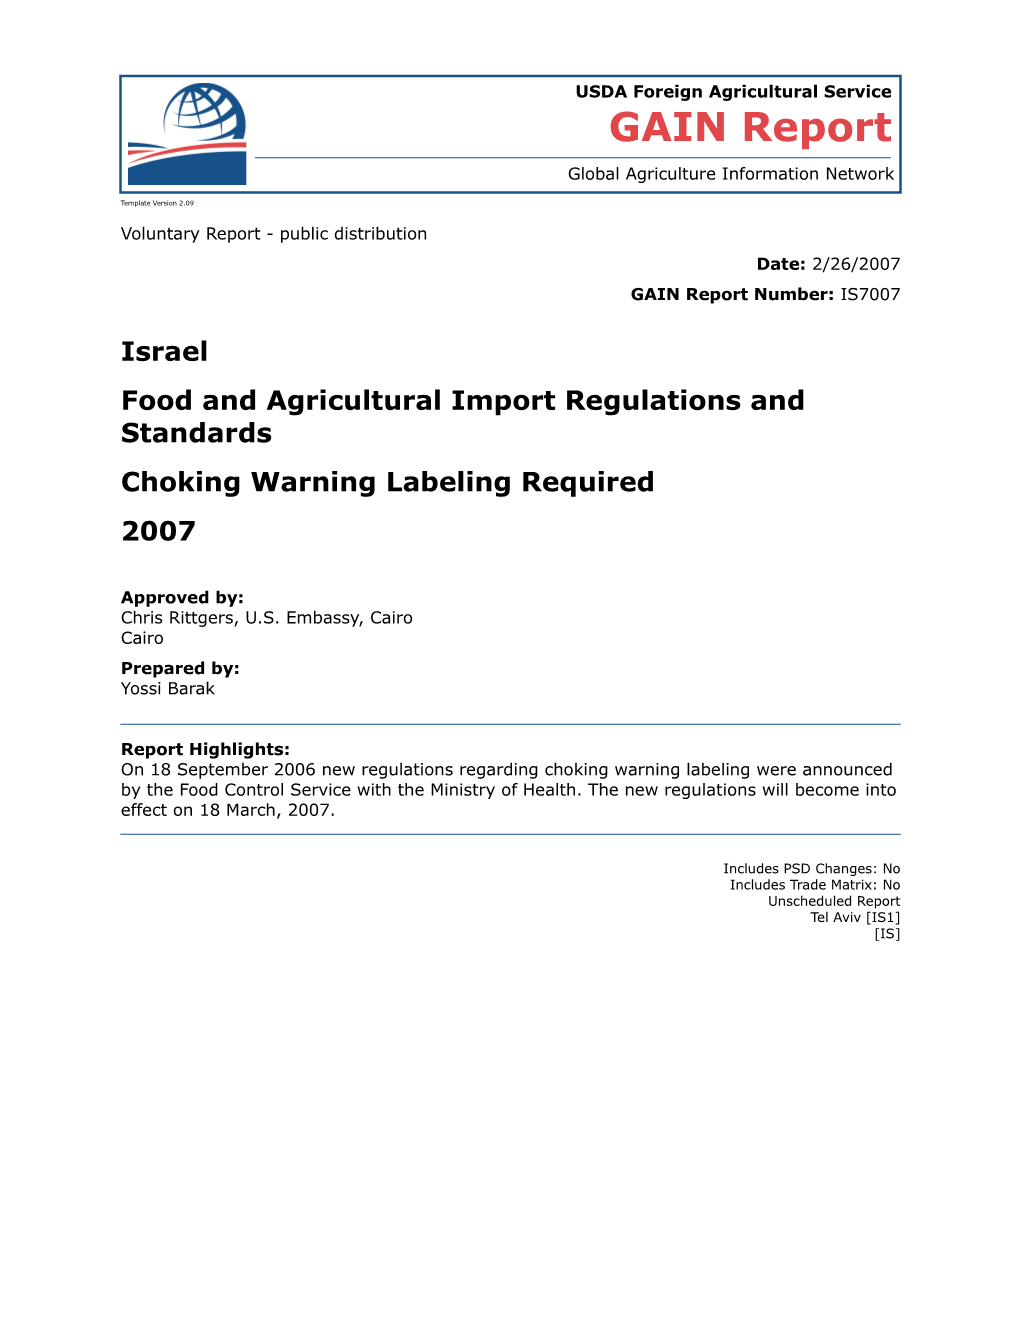 Food and Agricultural Import Regulations and Standards s5